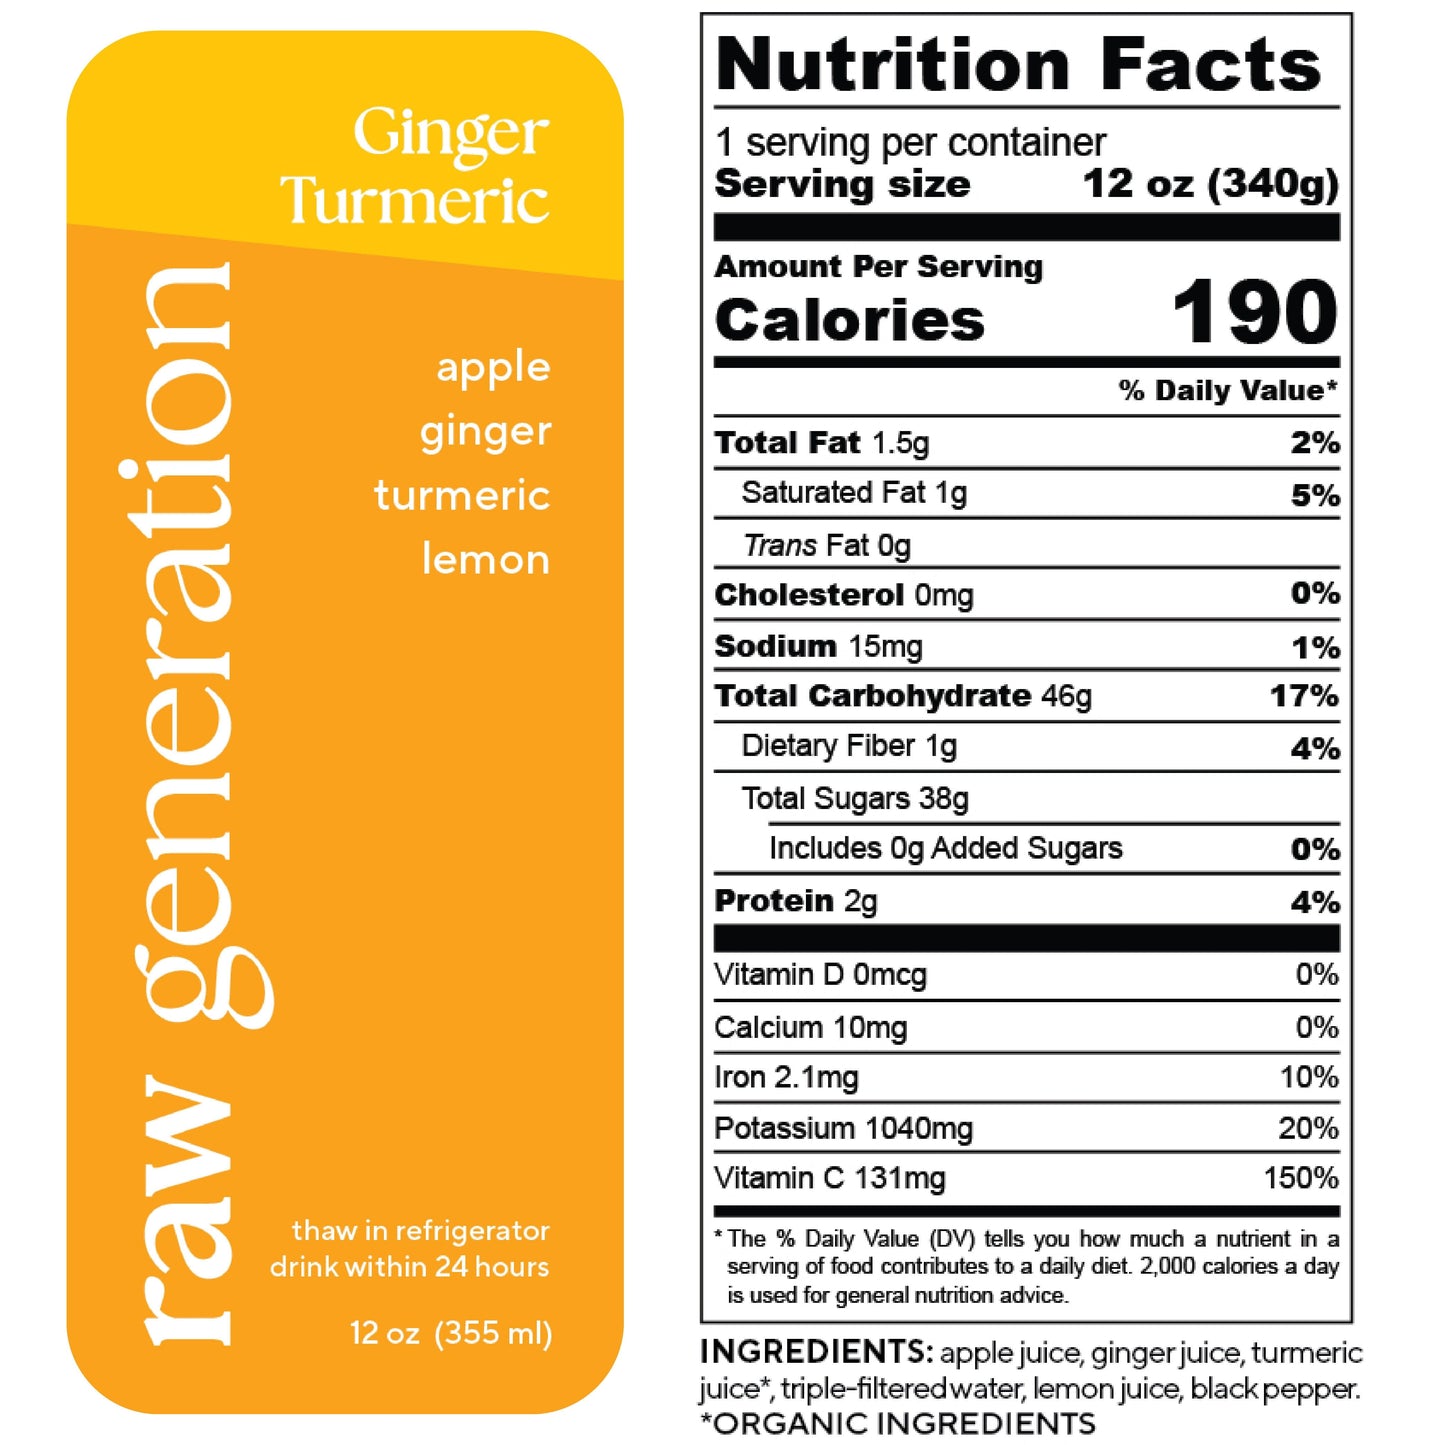 Nutrition Facts, 1 serving/container, 12 oz (340g), Calories 190, Total Fat 1.5g, Saturated Fat 1g, Trans Fat 0g, Cholesterol 0mg, Sodium 15mg, Total Carbohydrate 46g, Dietary Fiber 1g, Total Sugars 38g, Added Sugars 0g, Protein 2g, Vitamin D 0mcg, Calcium 10mg, Iron 2.1mg, Potassium 1040mg, Vitamin C 131mg; Ingredients: apple juice, ginger juice, turmeric juice (organic), triple-filtered water, lemon juice, black pepper.